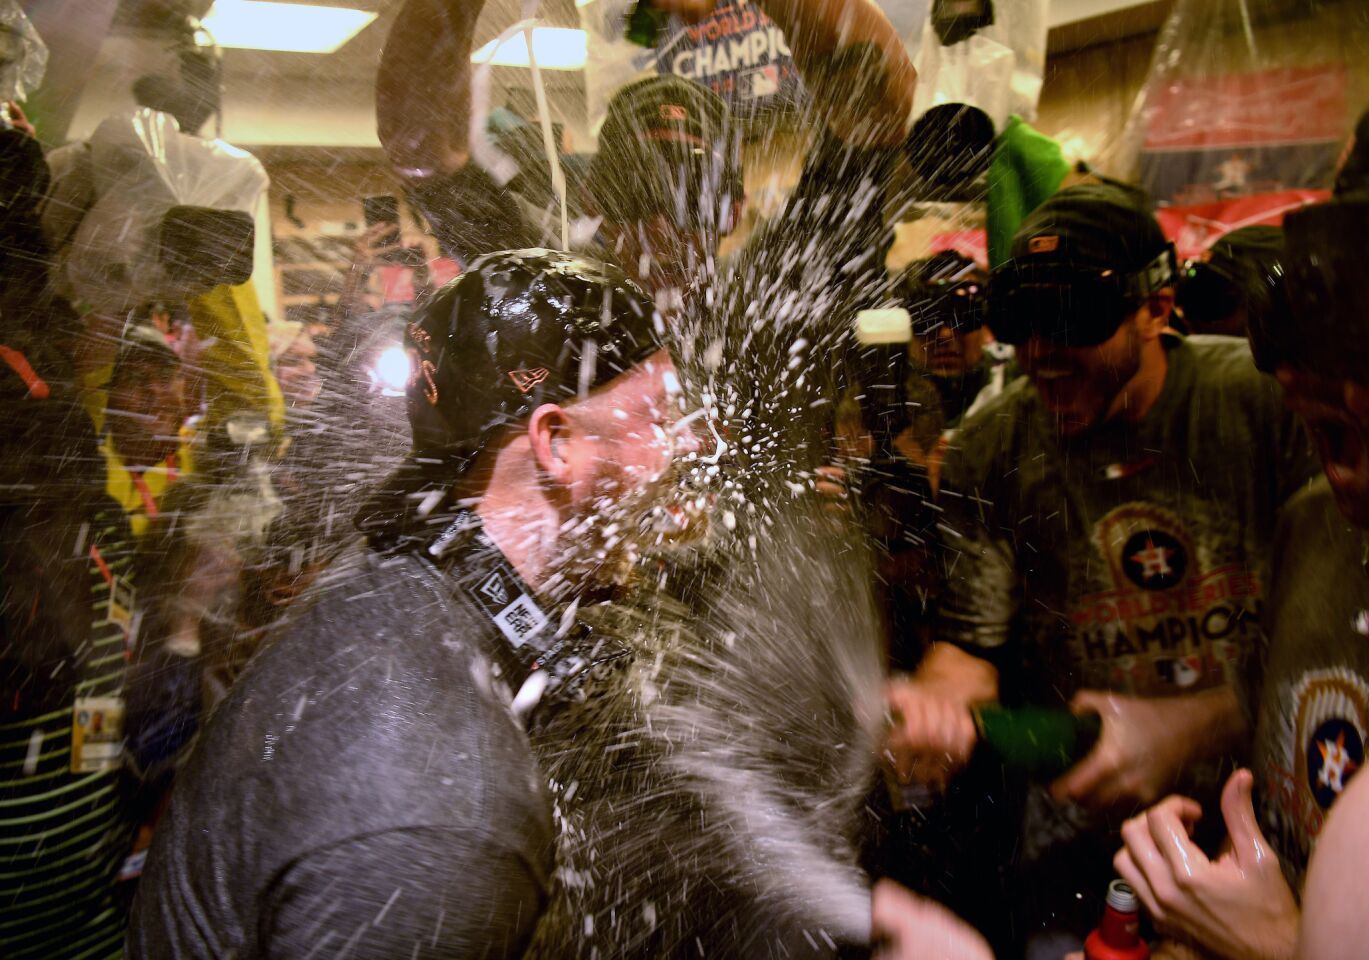 Astro players spray champagne in the clubhouse.